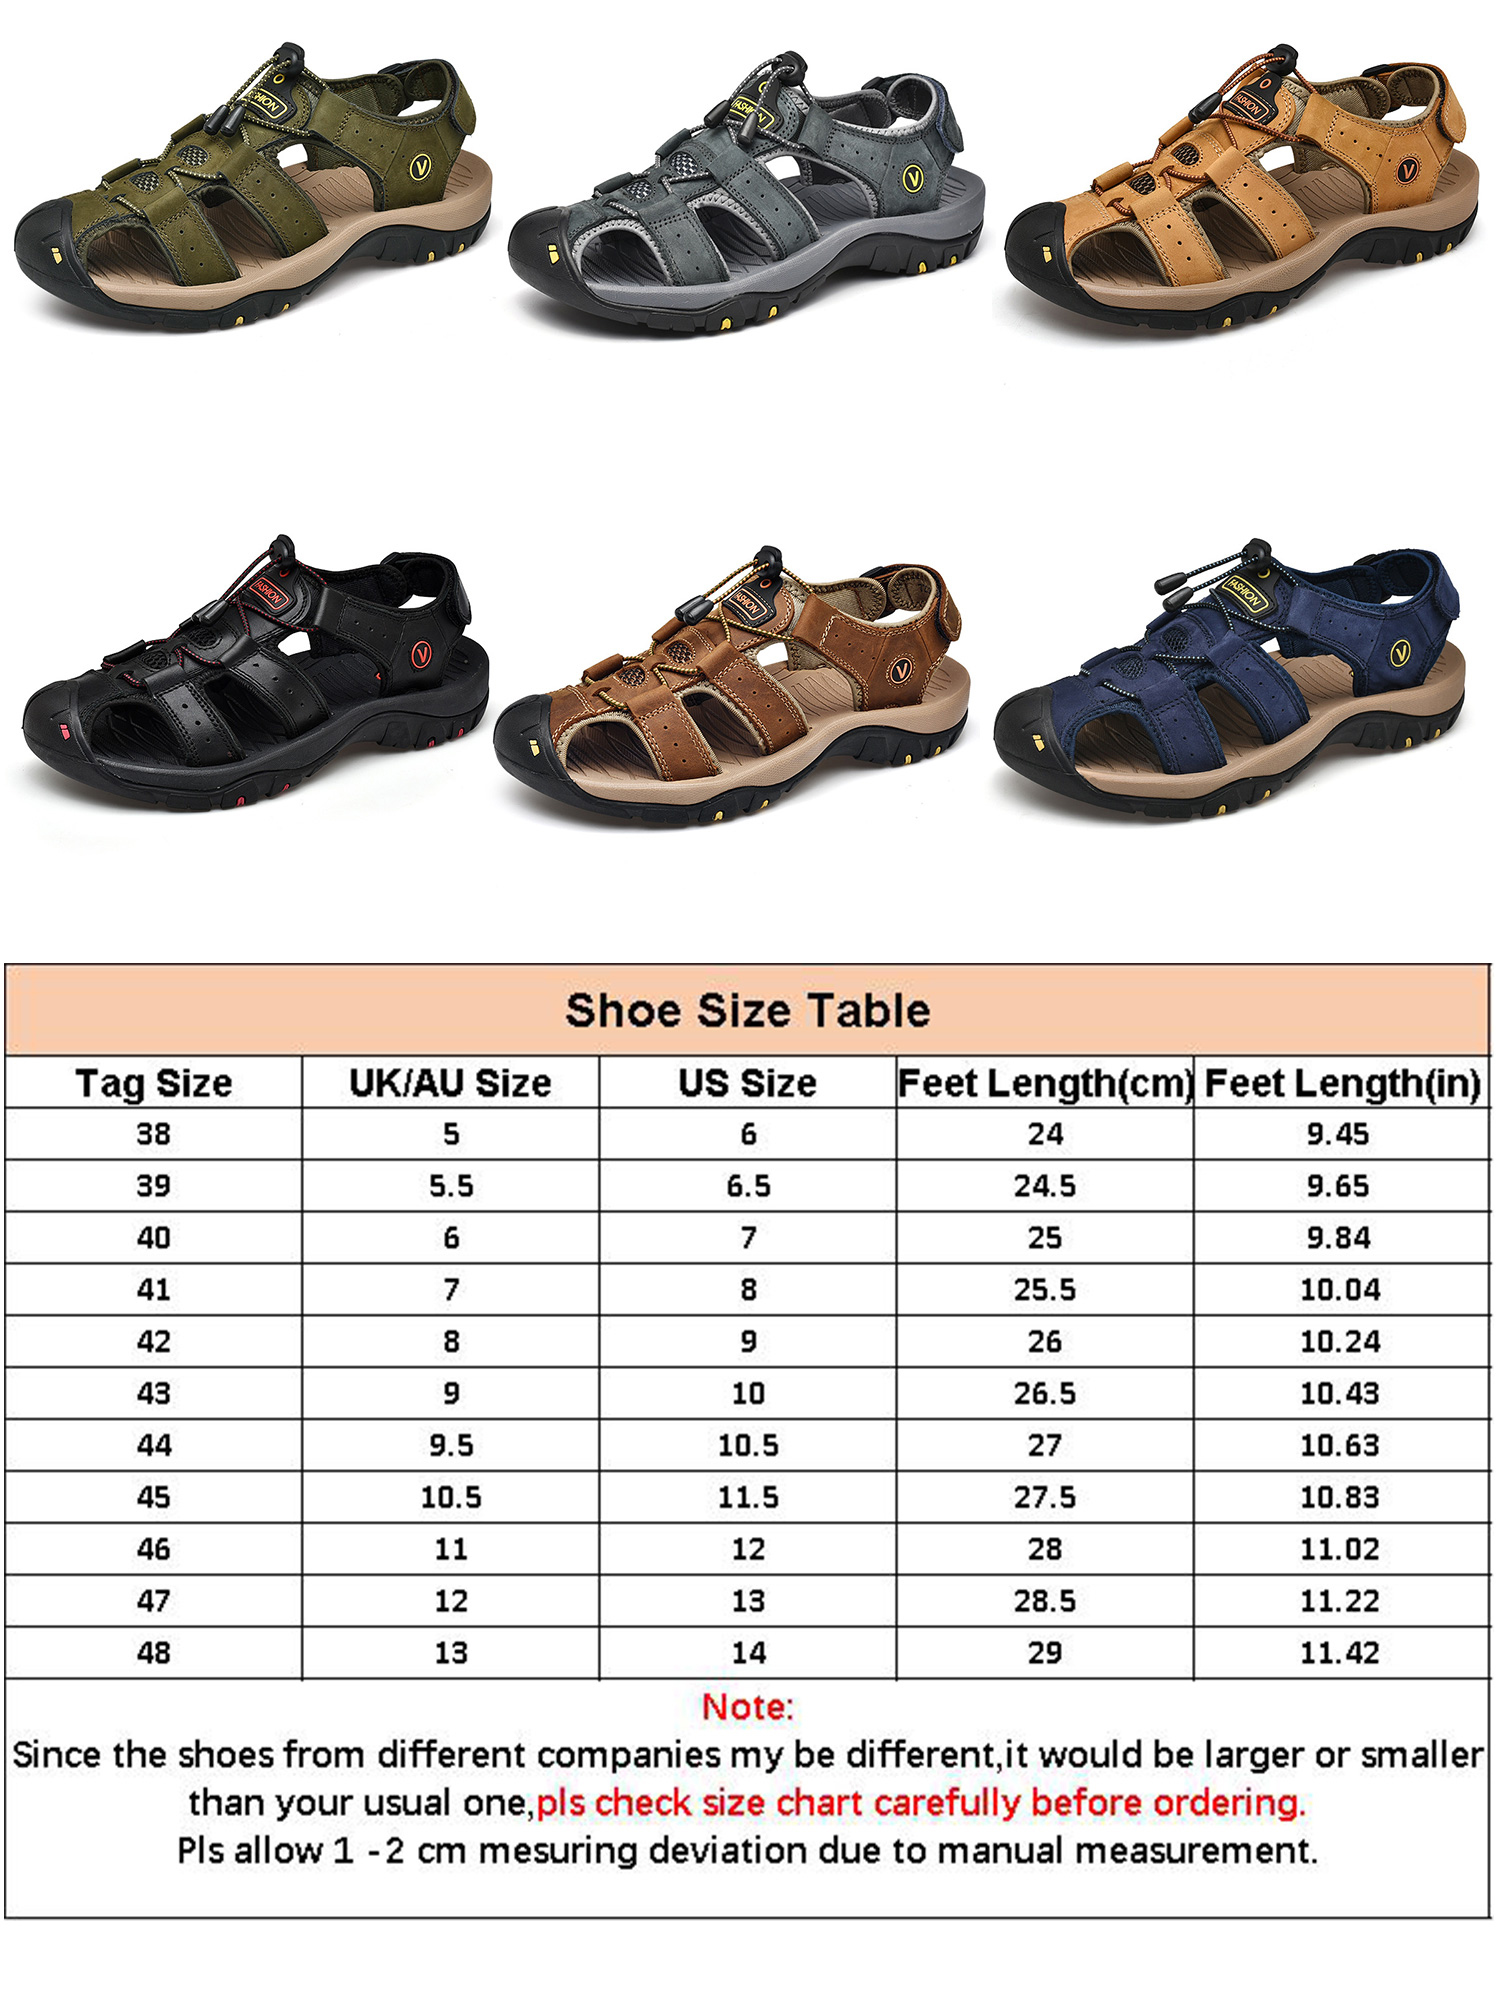 Harsuny Men's Sandals Summer Casual Beach Sandals for Men Outdoor and ...